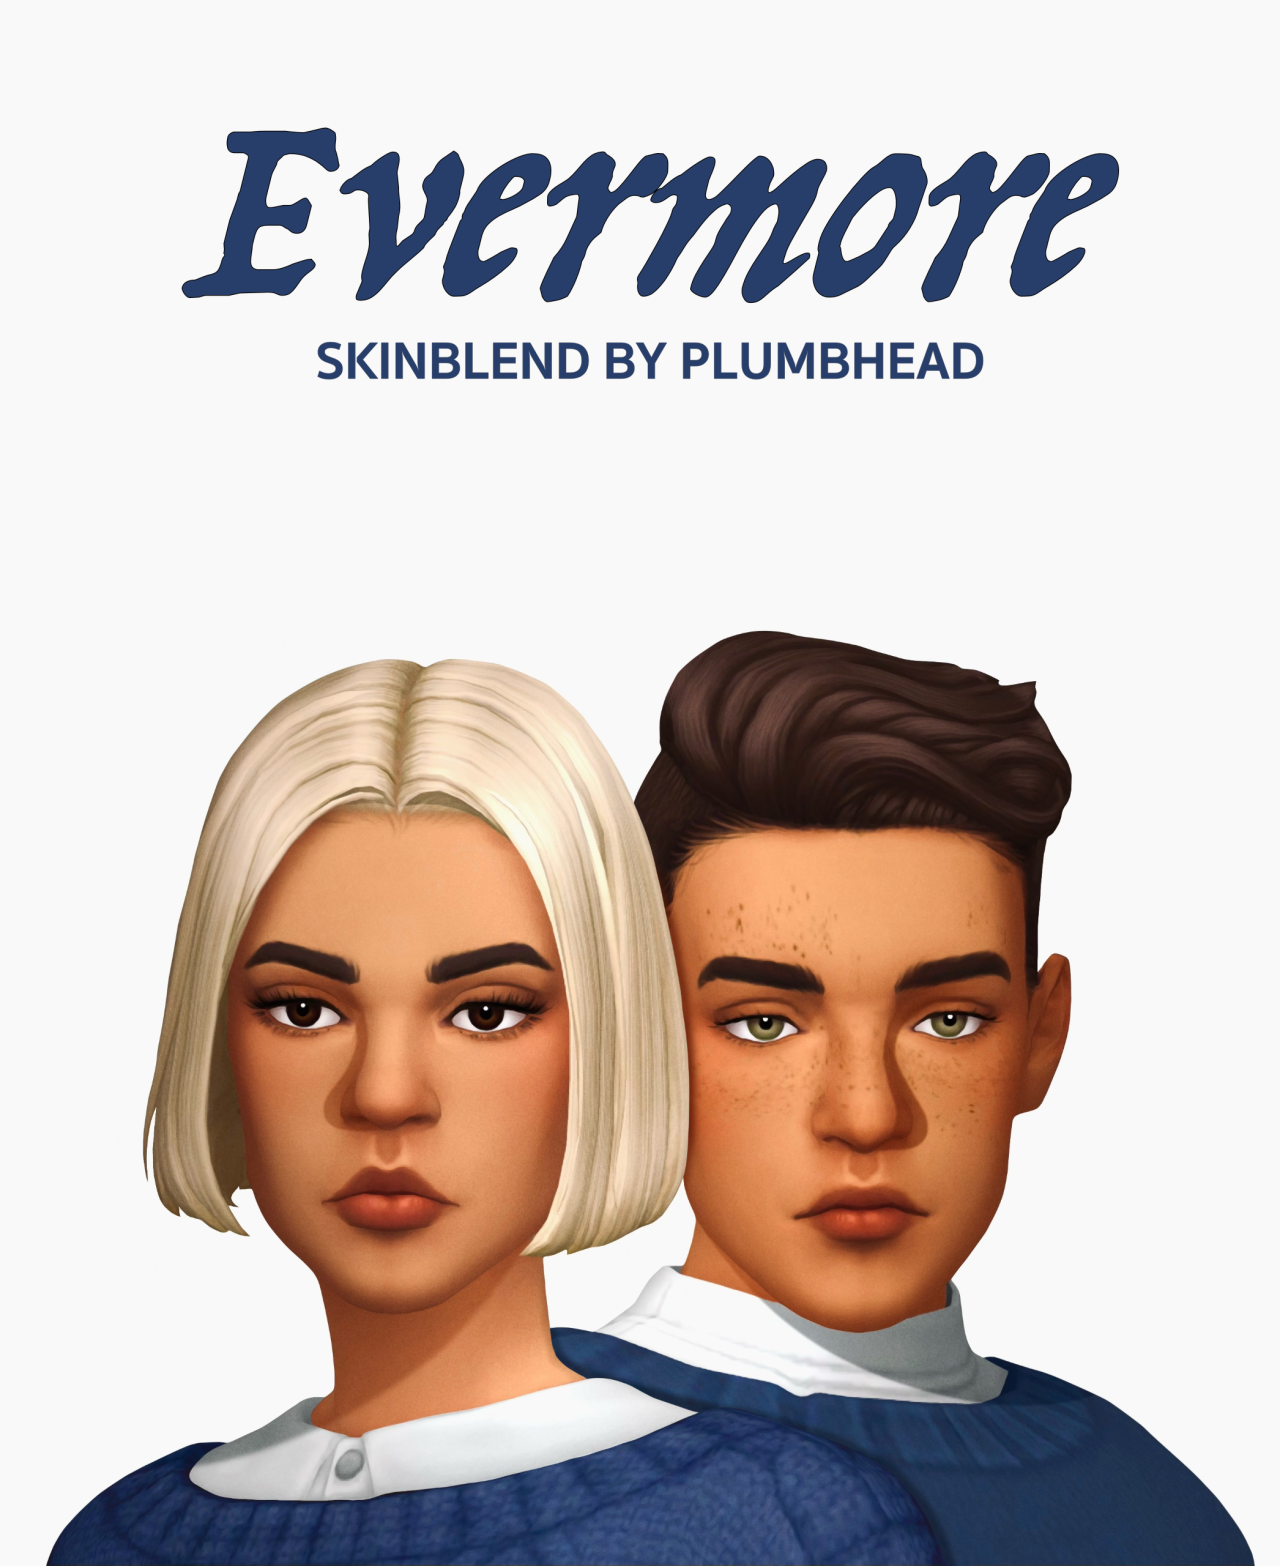 Evermore Skinblend“I had a feeling so peculiar that this pain would be for evermore
”
Details:
• 3 Swatches
• For all ages and genders
• Monolid friendly
DOWNLOAD: SFS / PATREONCredits, unedited pictures and comparison below the...